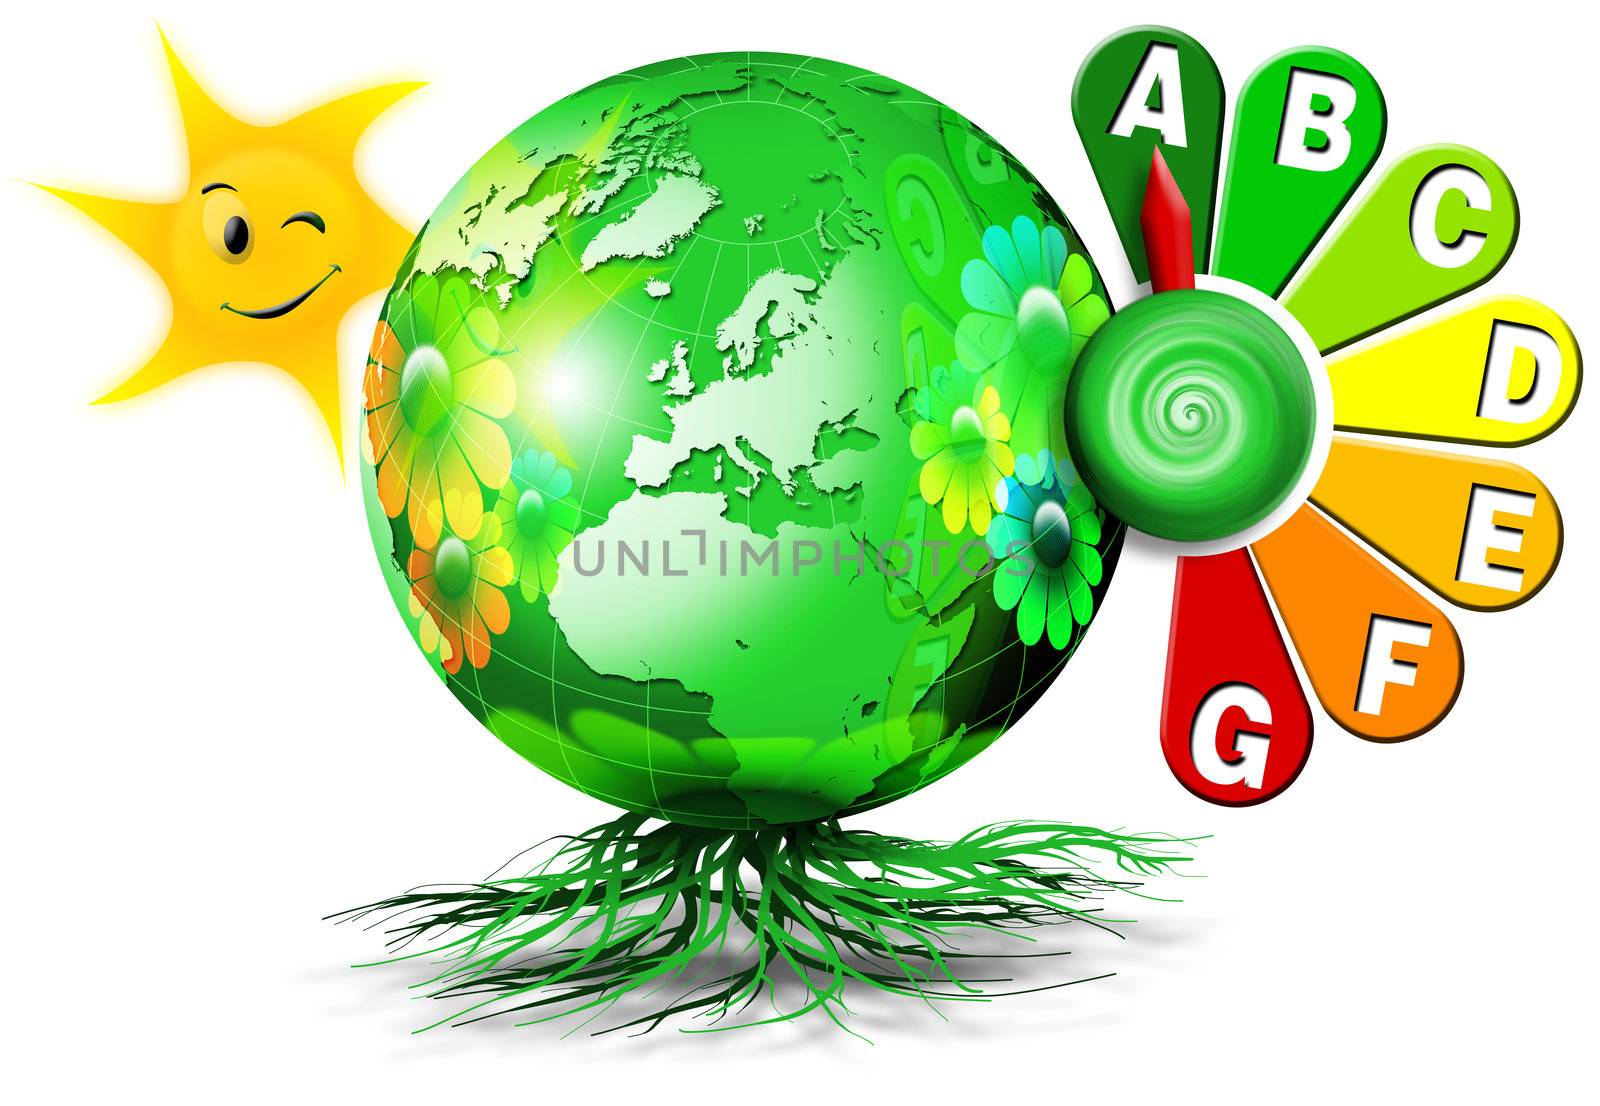 Illustration of green globe with roots, flower petals and a clock